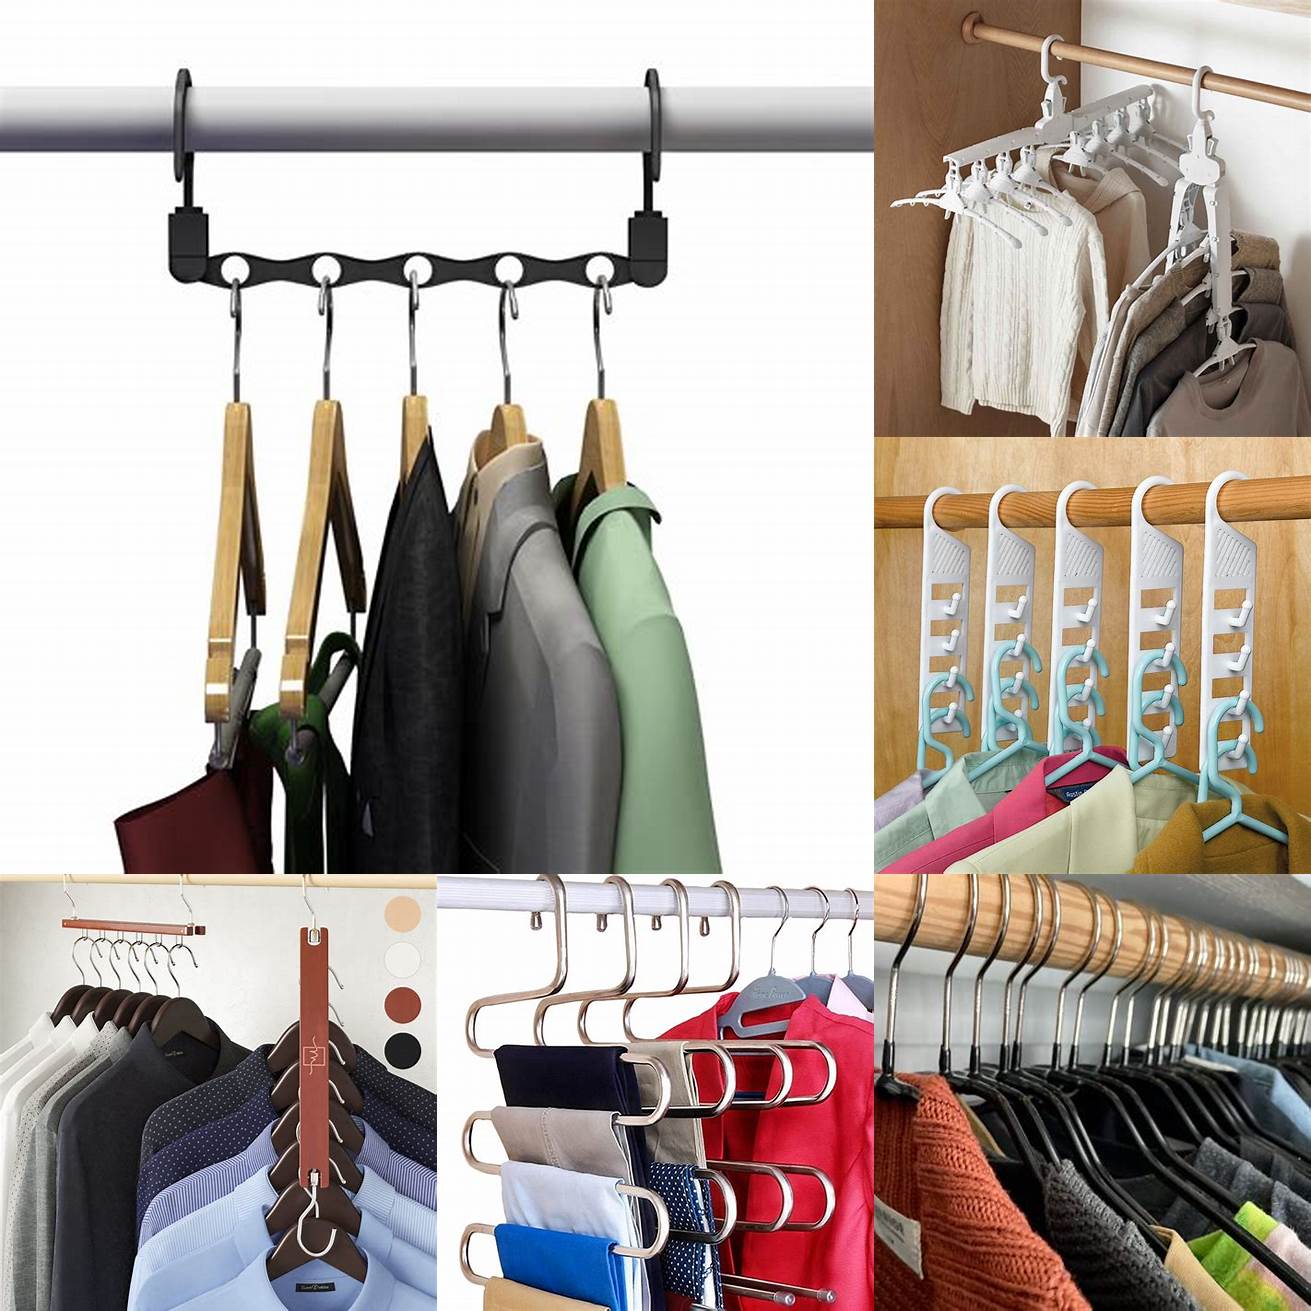 1 Use space-saving hangers Use slim hangers that take up less space in your closet